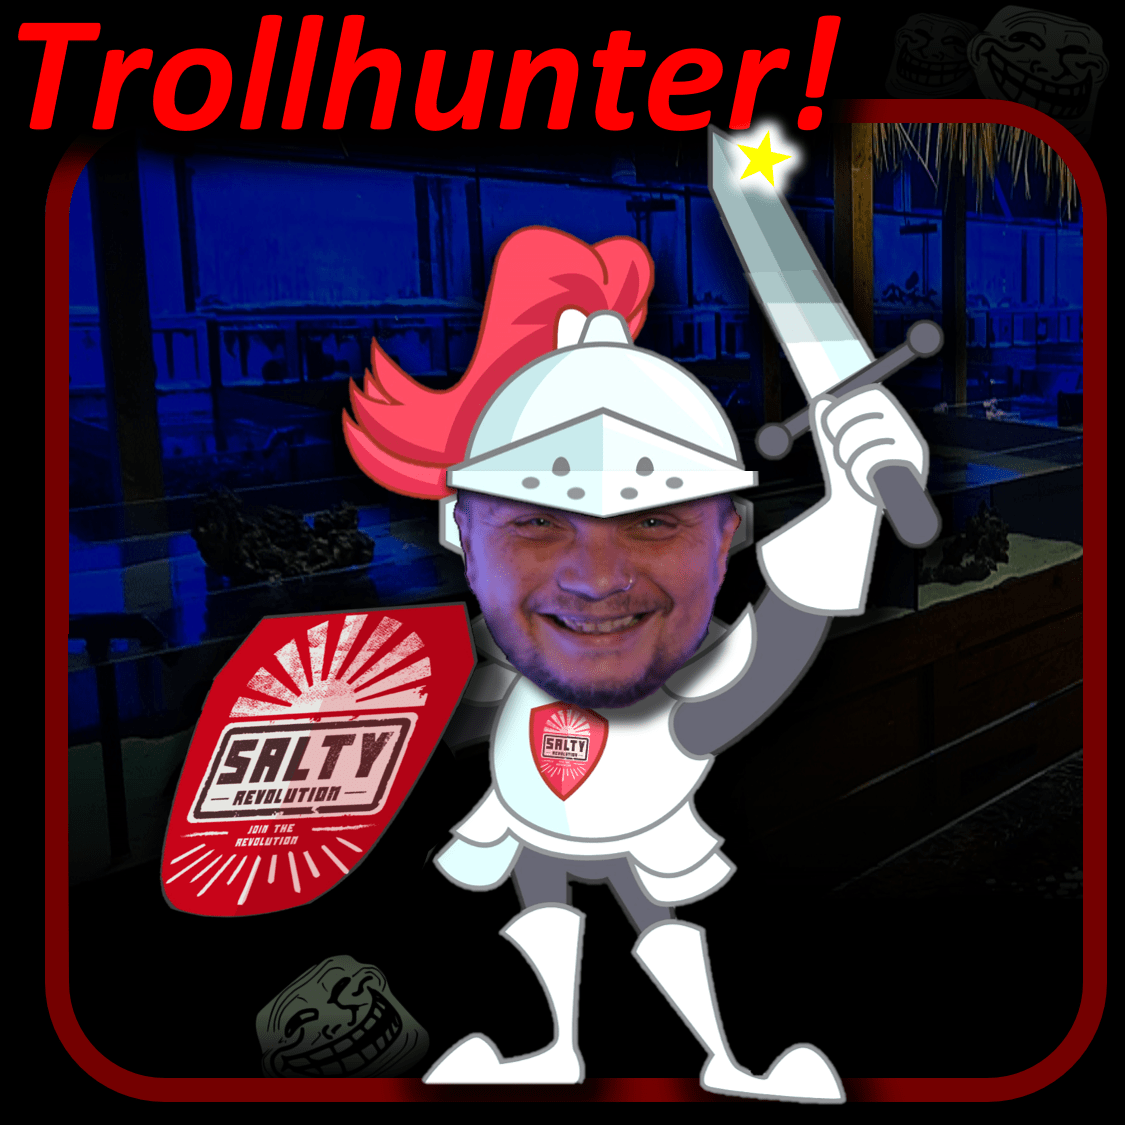 = GRAPHIC Trollhunter 1125px x 1125px png comp.png